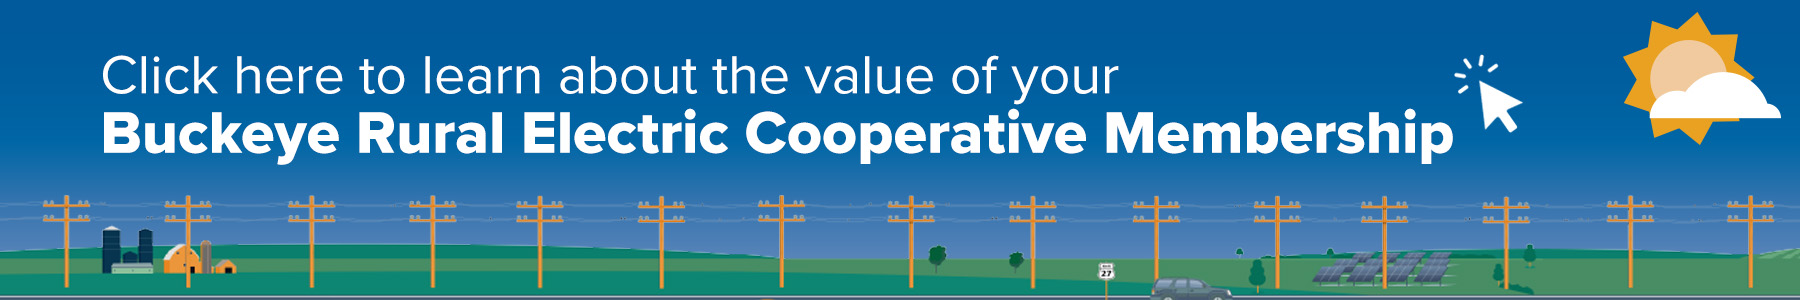 Click to learn about the value of your cooperative membership.